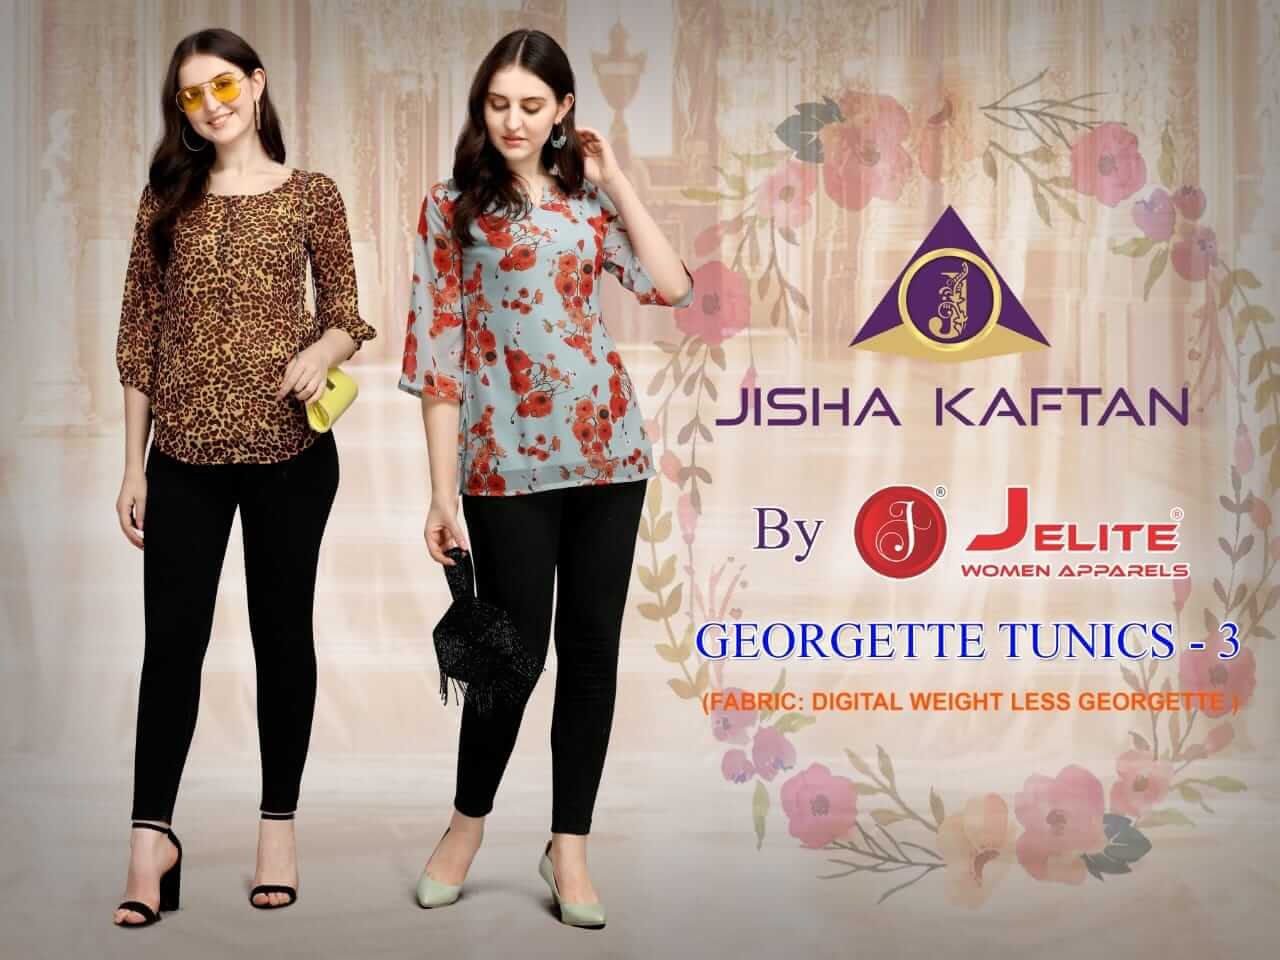 Jelite Georgette Tunics Vol 3 Western Top Catalog In Wholesale Price, Purchase Full Catalog of Jelite Georgette Tunics Vol 3 In Wholesale Price Online